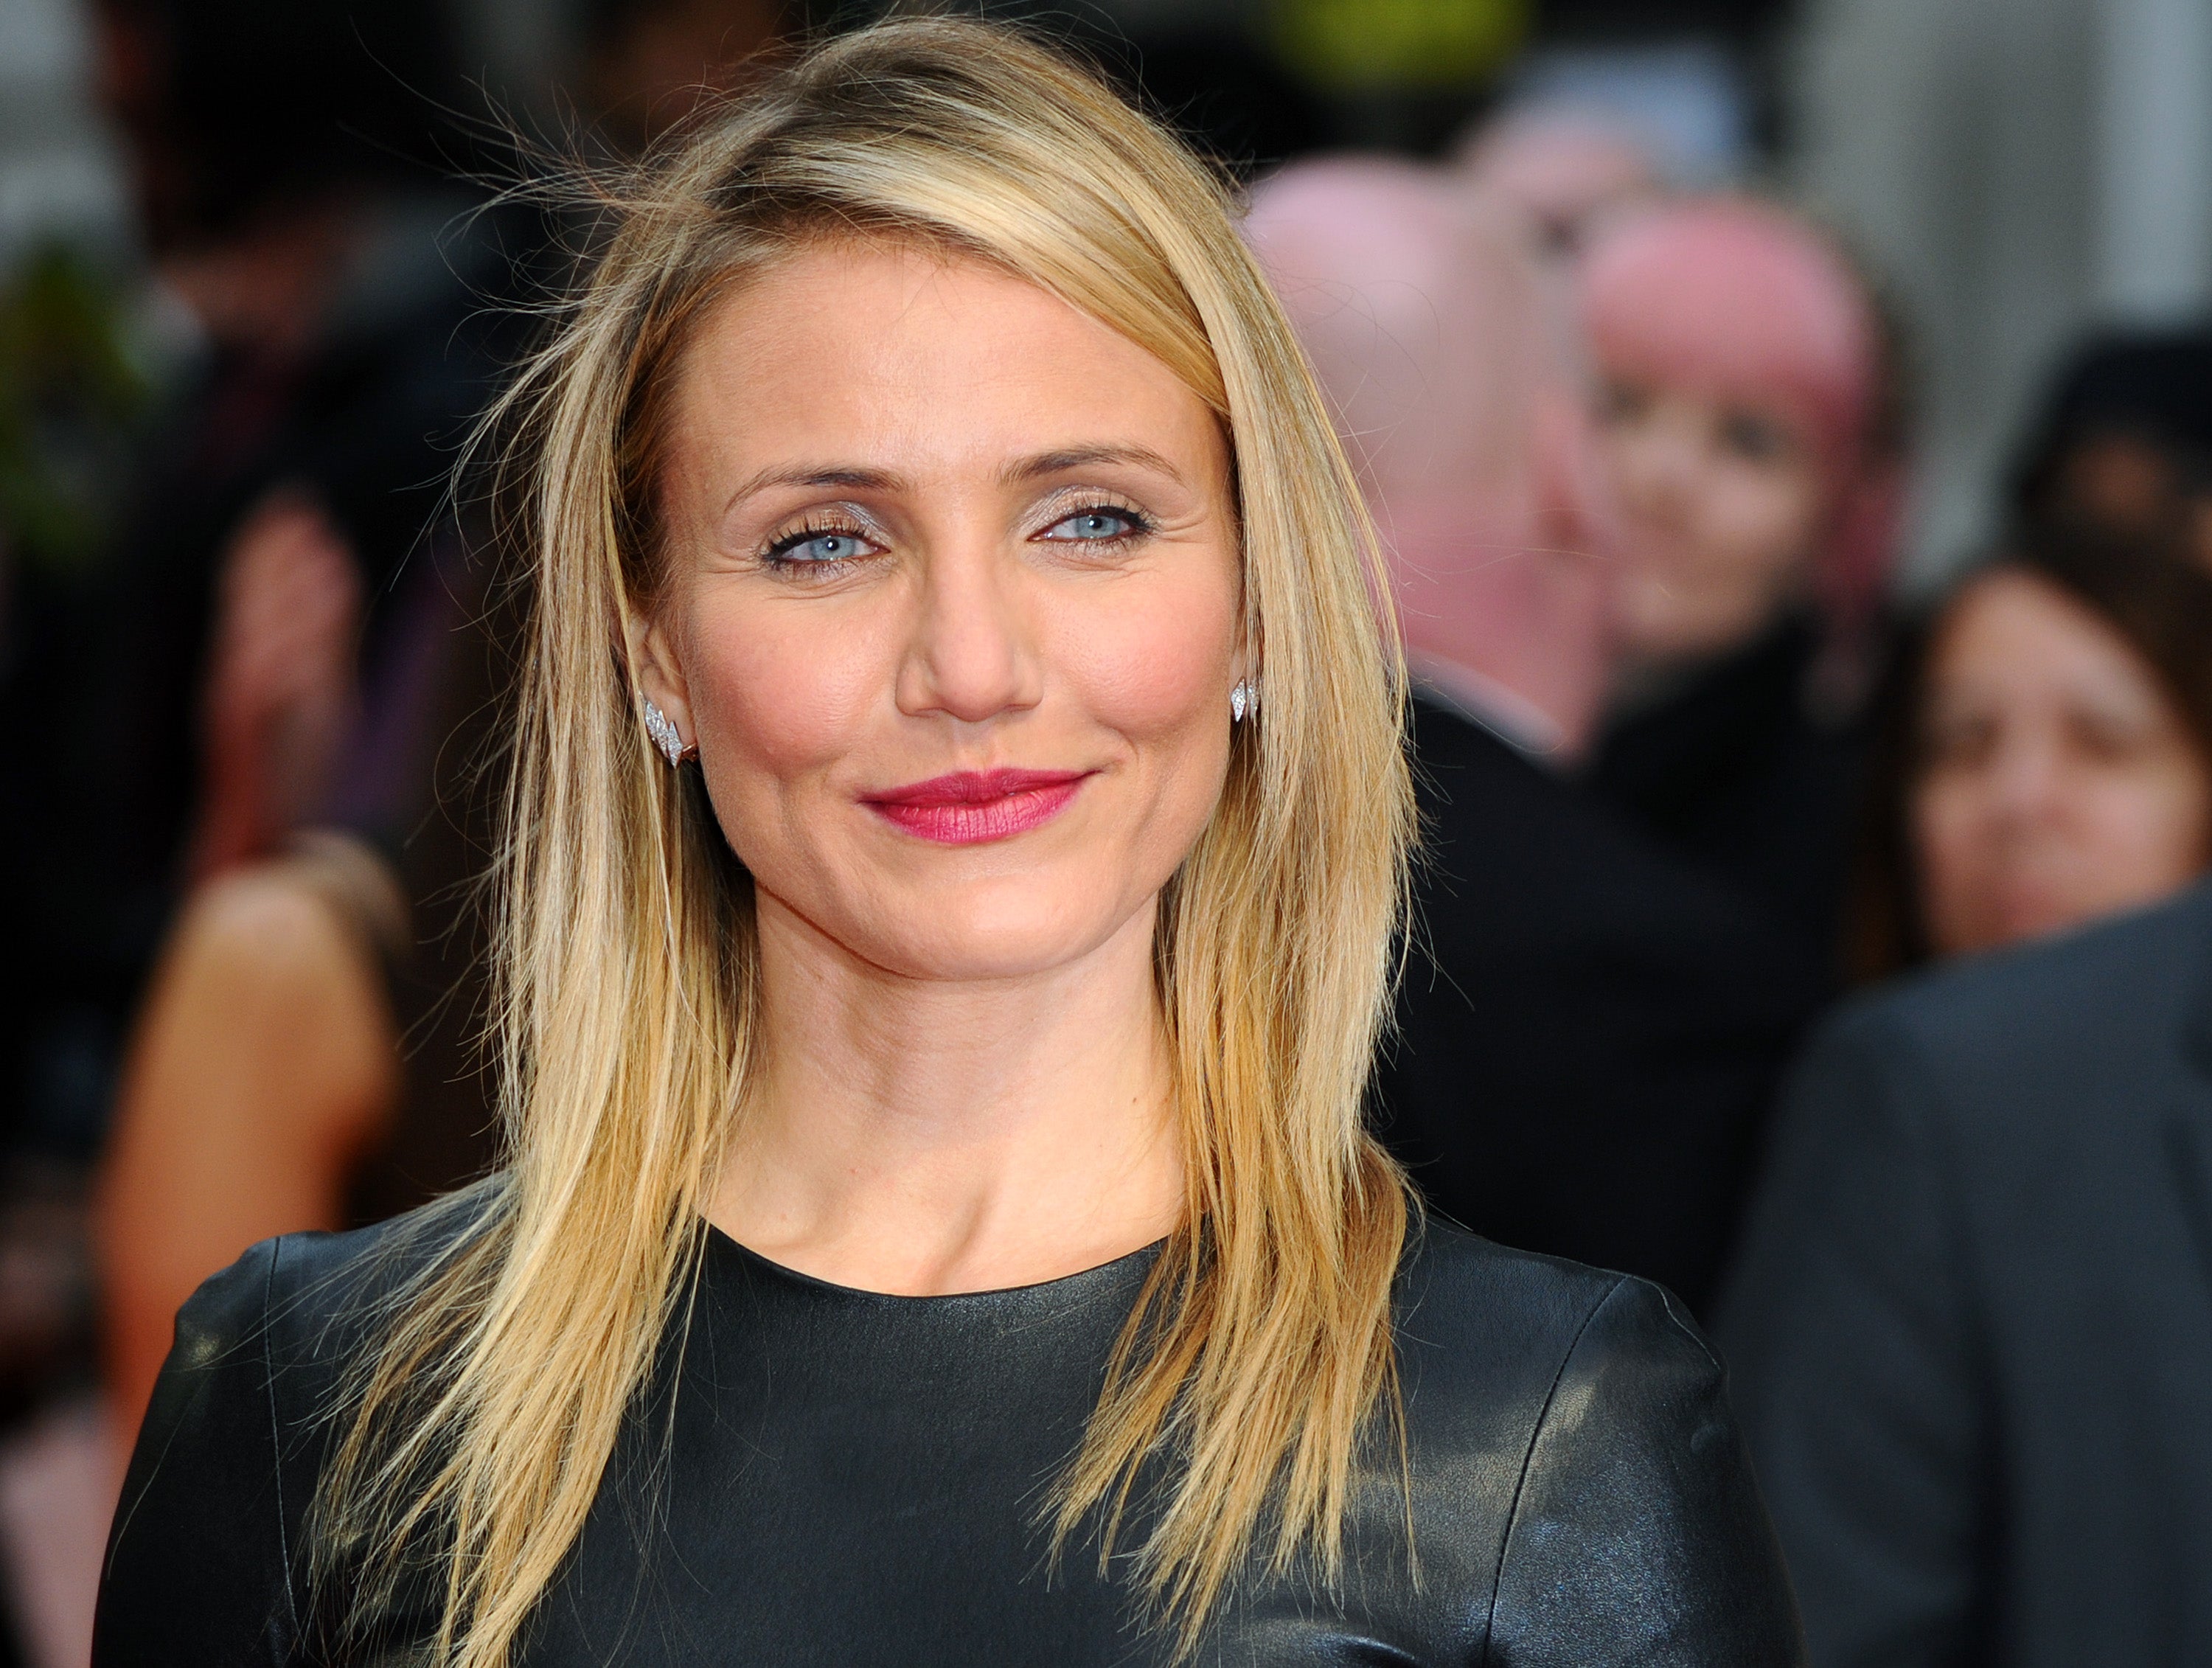 Cameron Diaz opens up about first meeting with Benji Madden